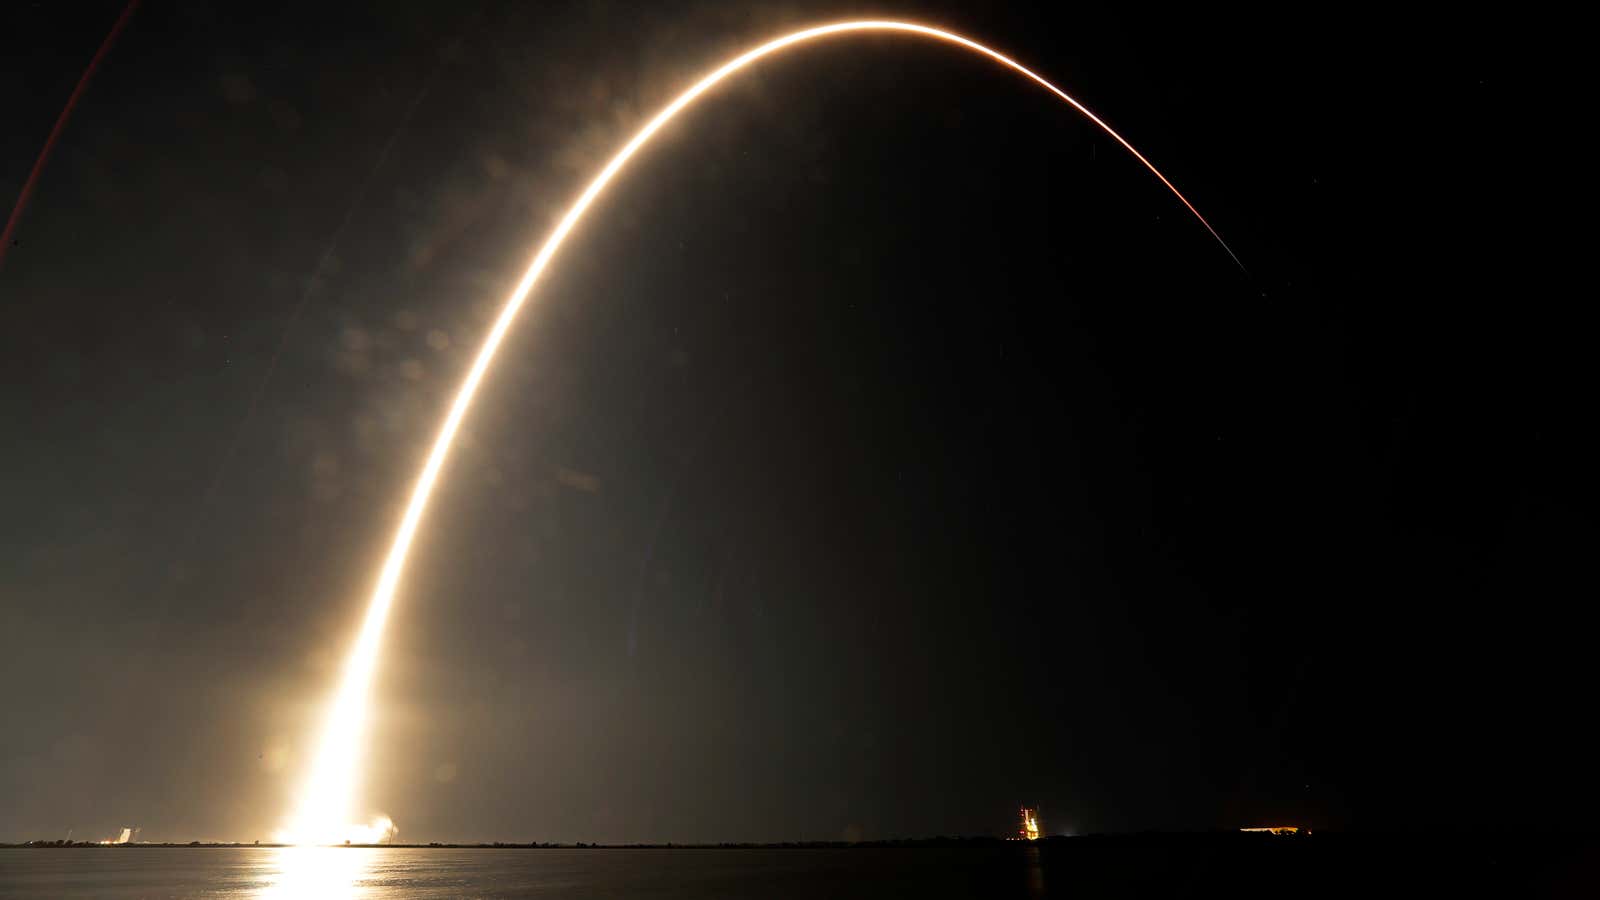 A SpaceX rocket launches from Cape Canaveral Air Force Station in 2018.